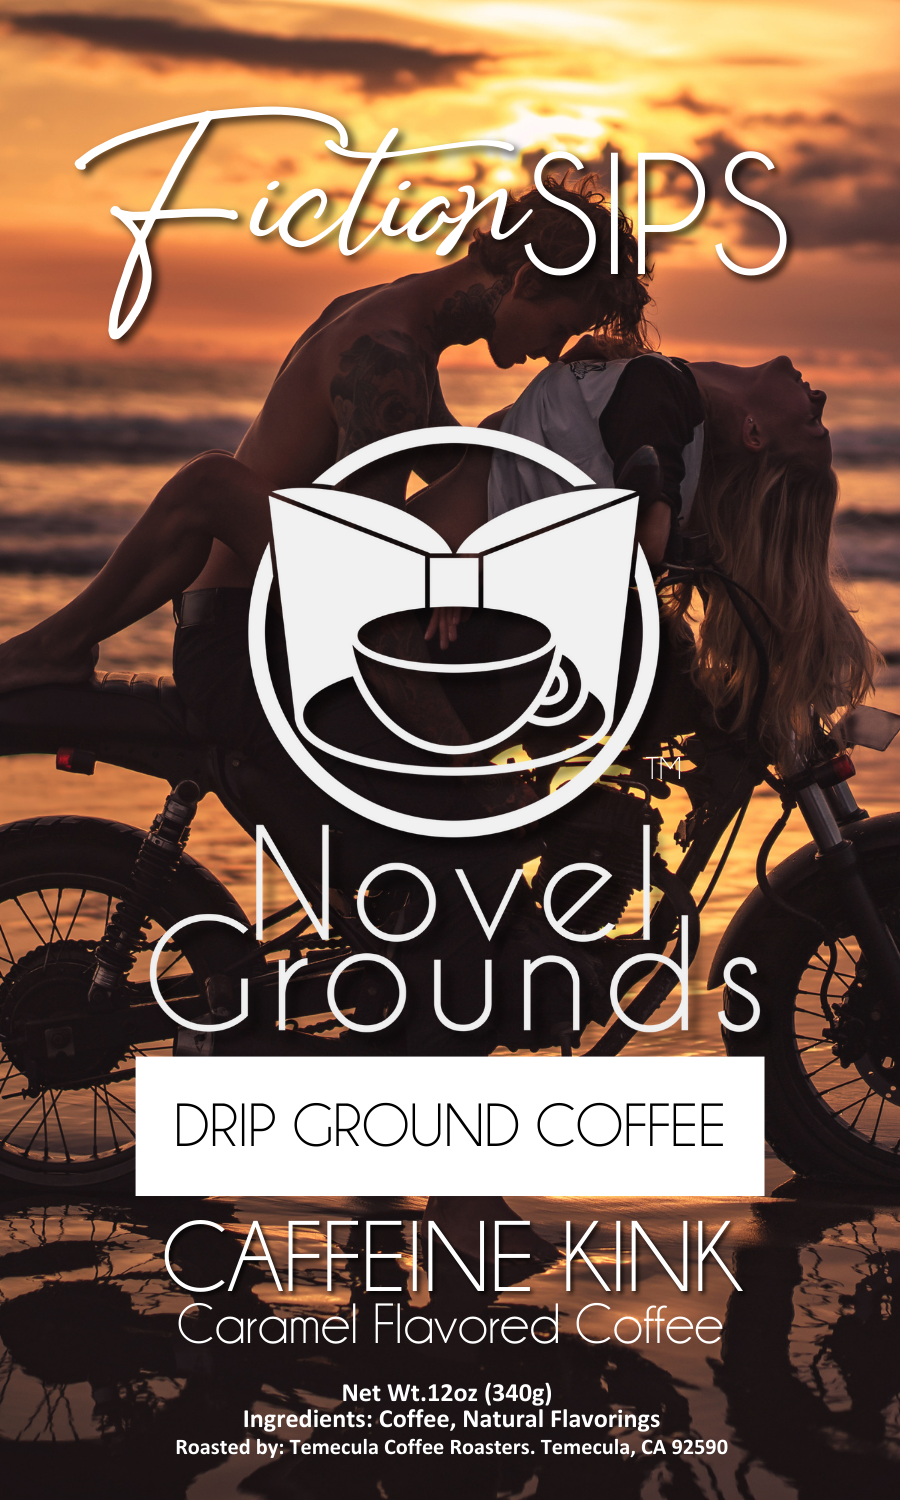 a poster for a coffee shop featuring two people on a bike